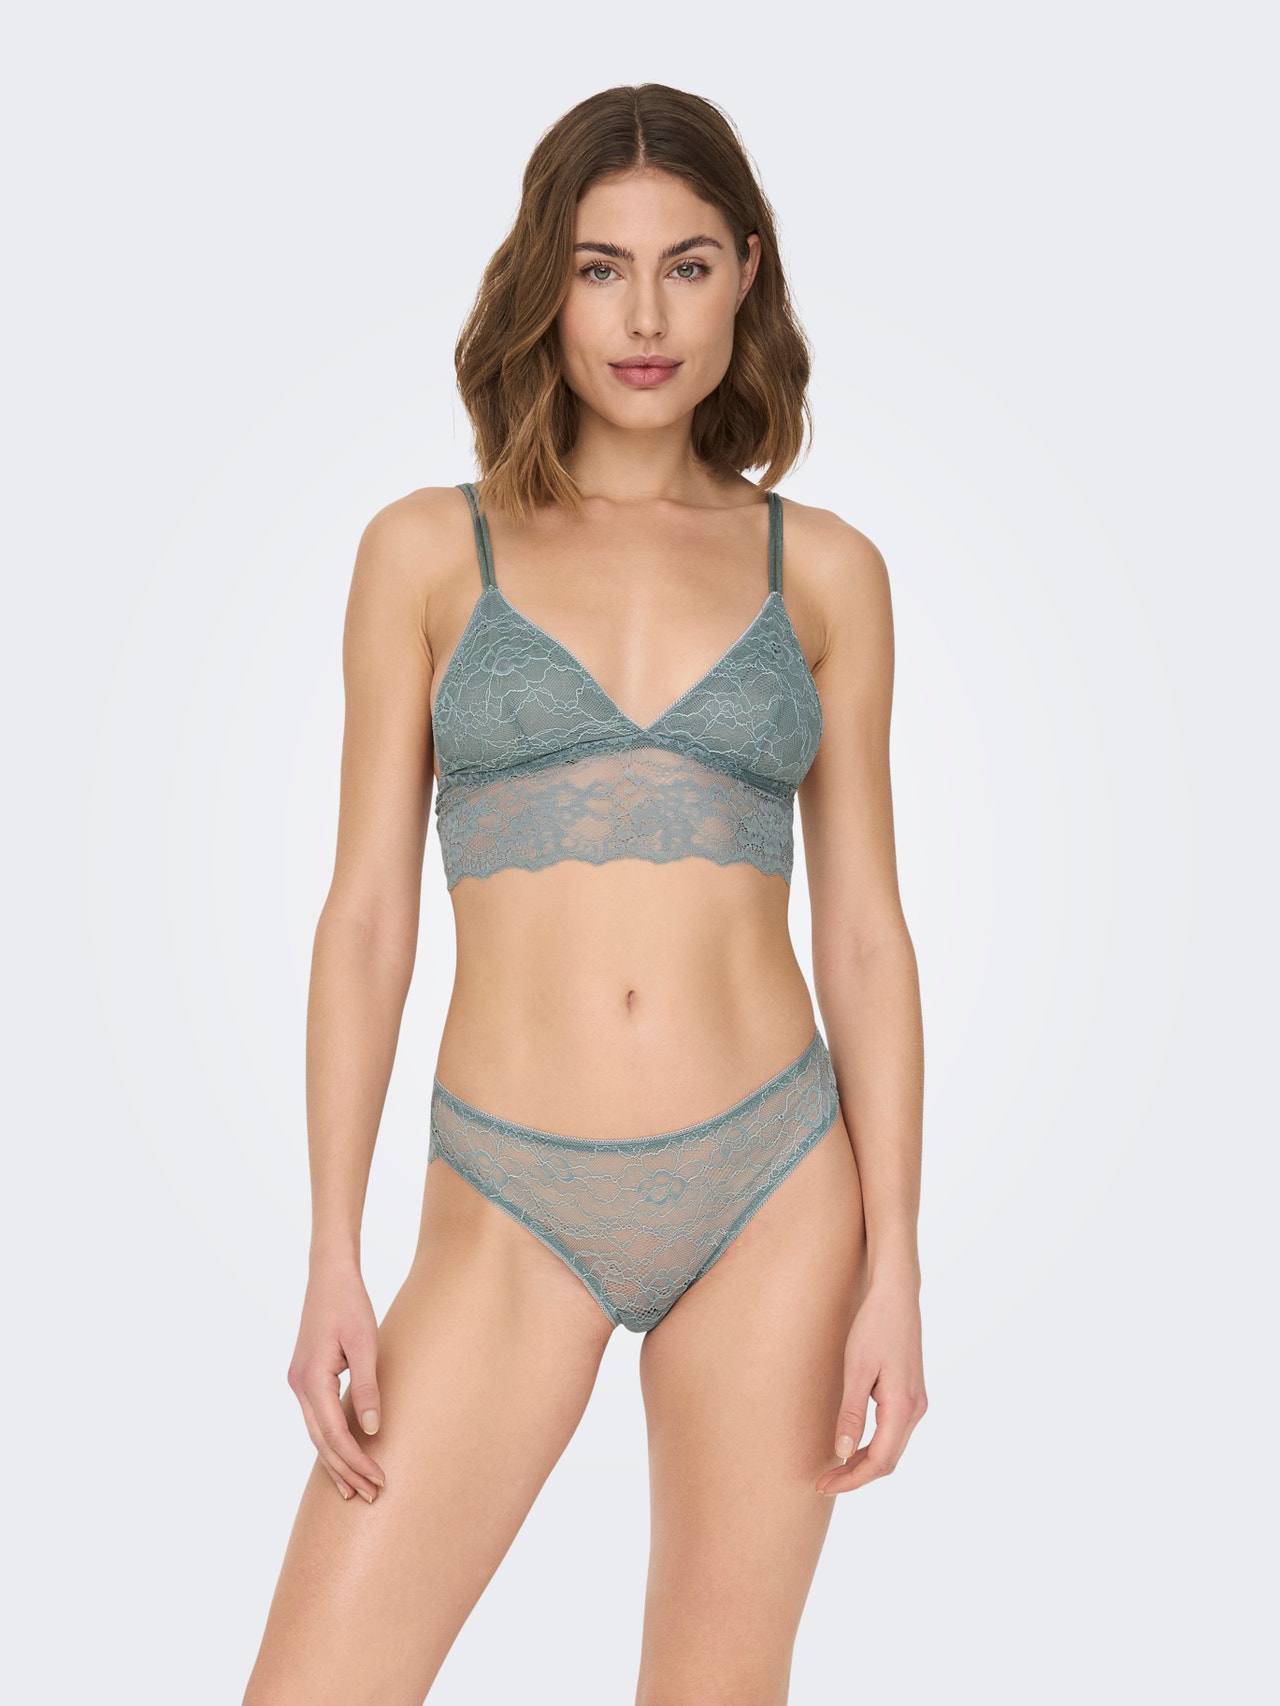 ONLY Bras -Stormy Sea - 15280854